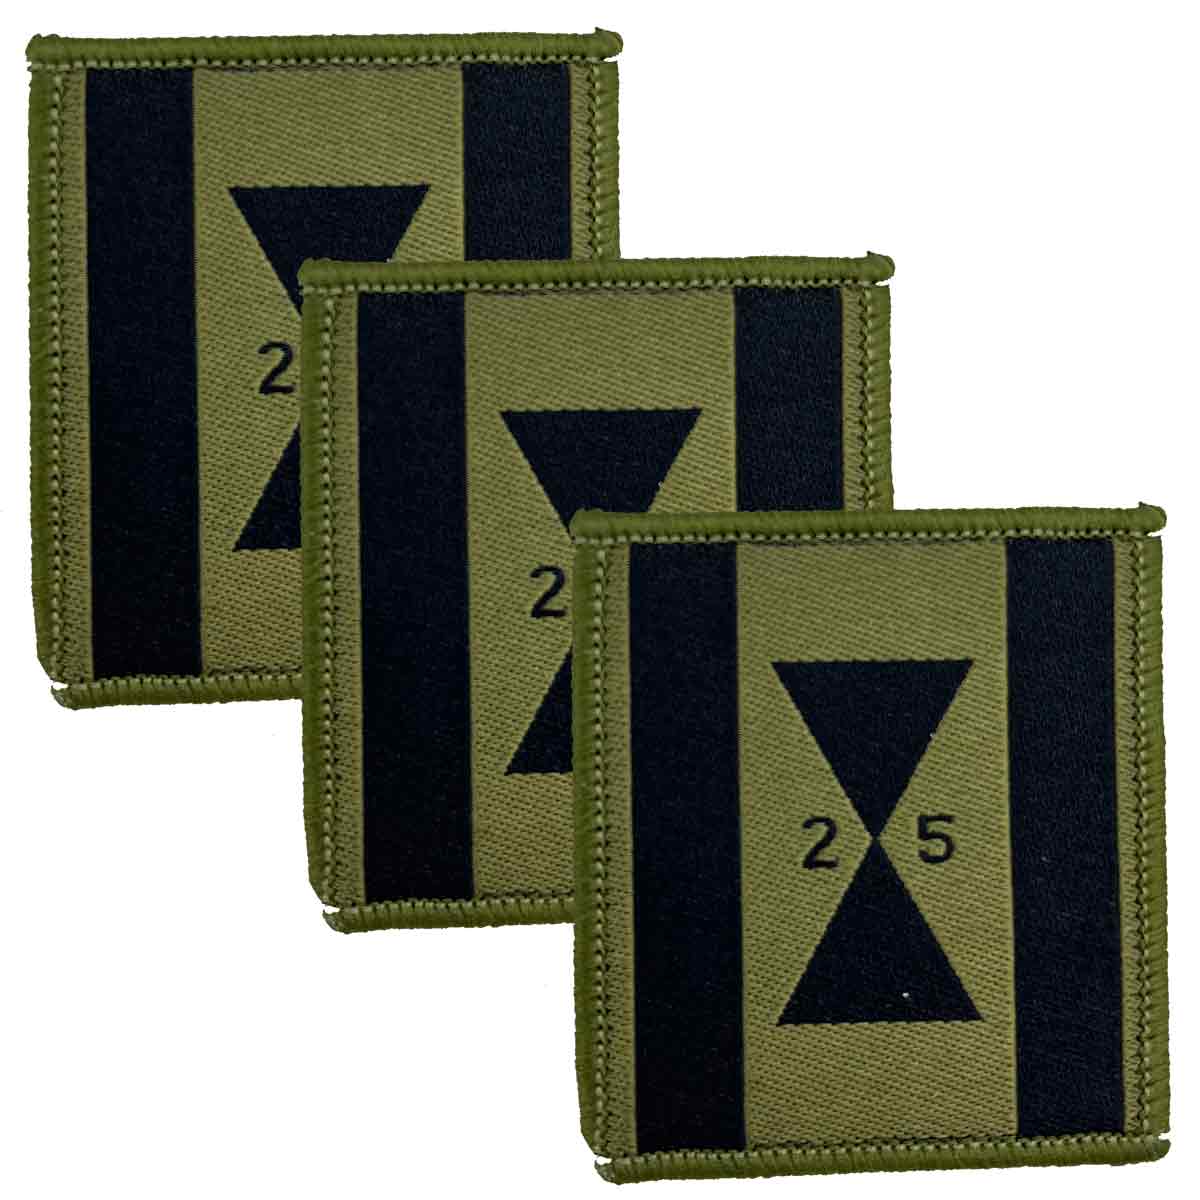 25 Close Support Engineer Group TRF - Iron On Sewn on Patch - John Bull Clothing